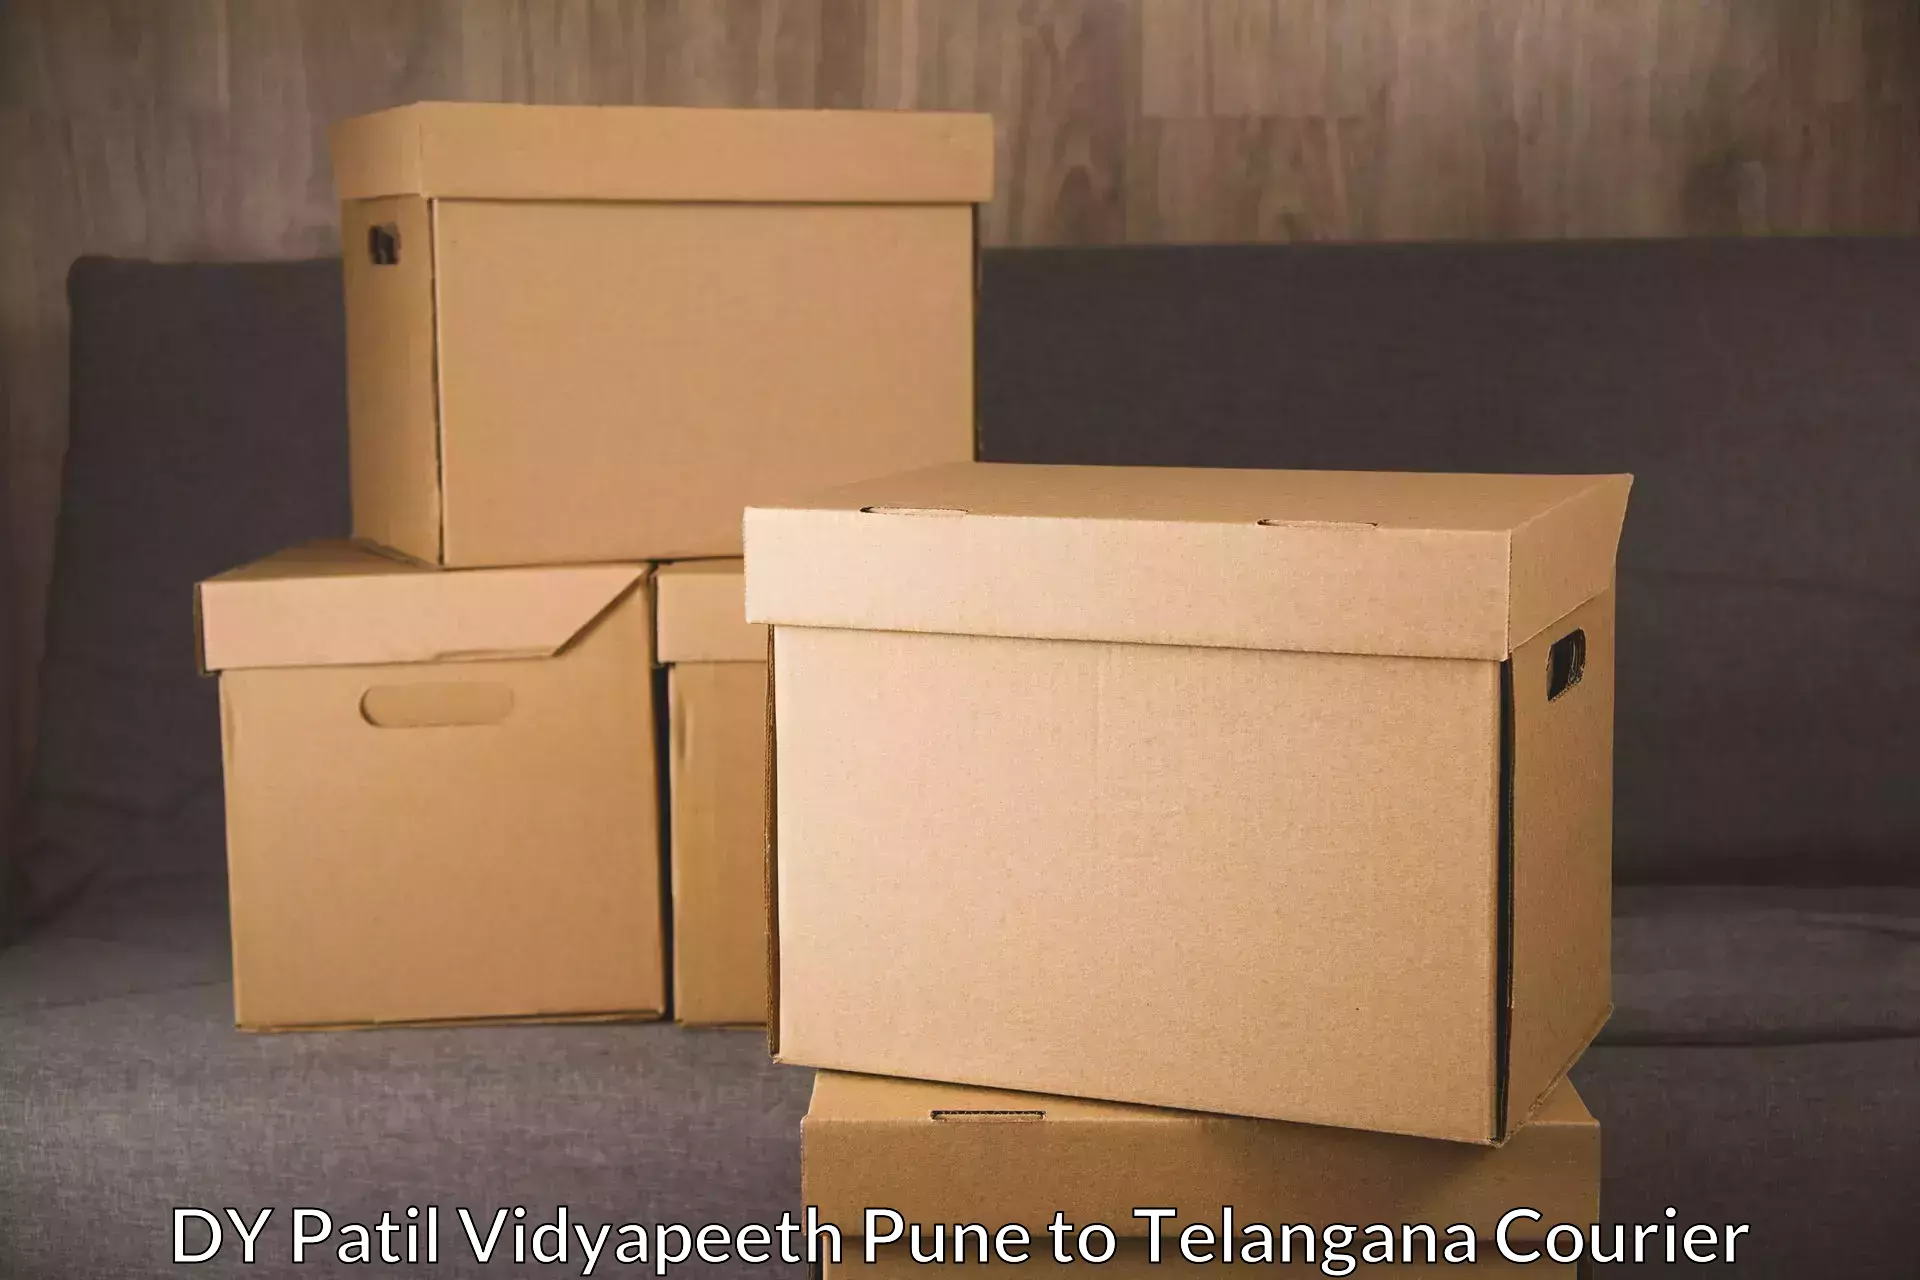 Speedy delivery service DY Patil Vidyapeeth Pune to Jagtial